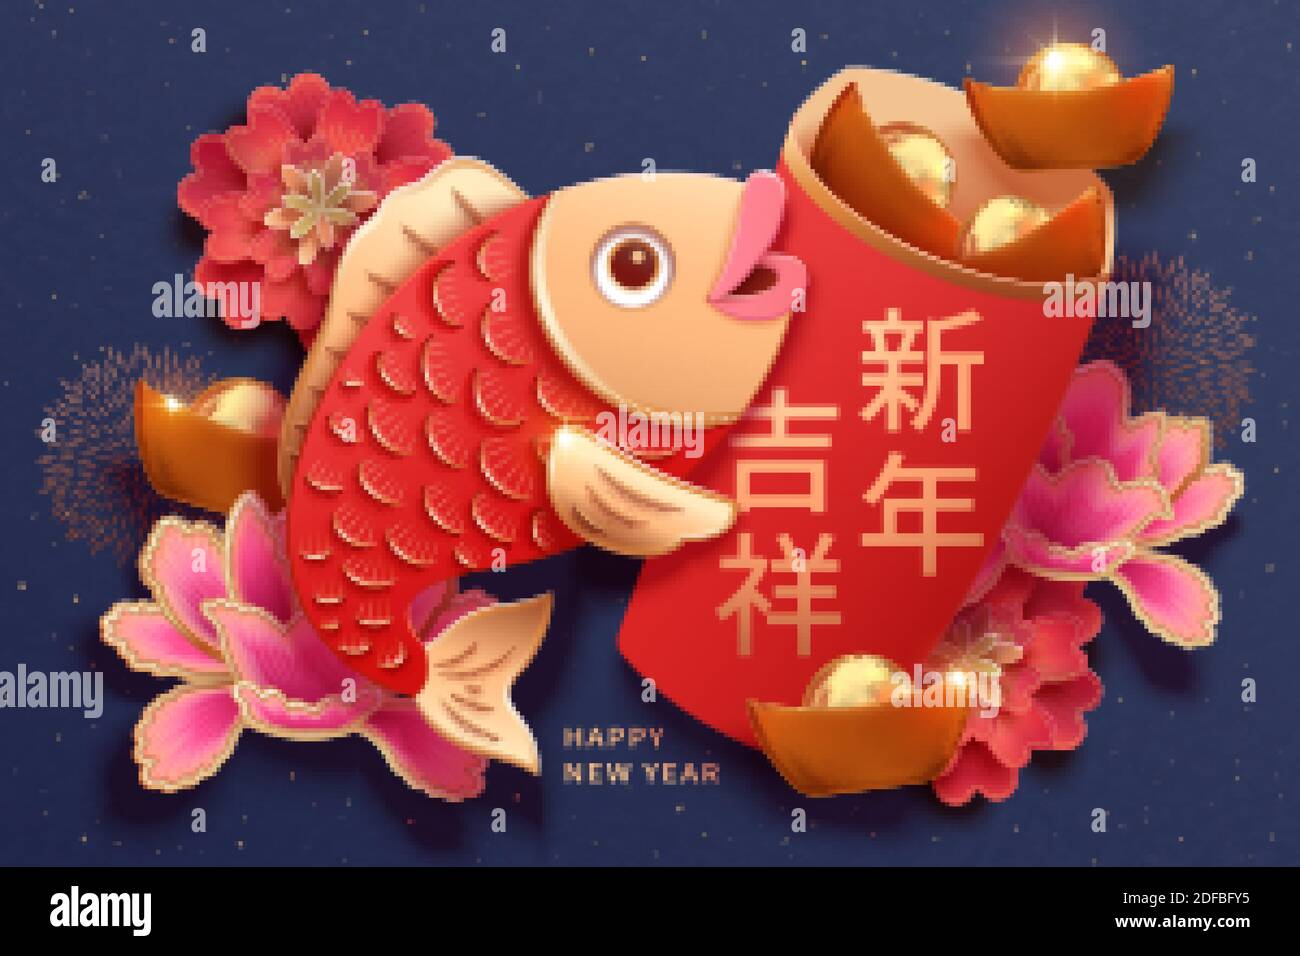 Lunar year paper art design with giant cute fish holding red envelope which is filled with 3d illustration gold ingots, Chinese translation: Auspiciou Stock Vector